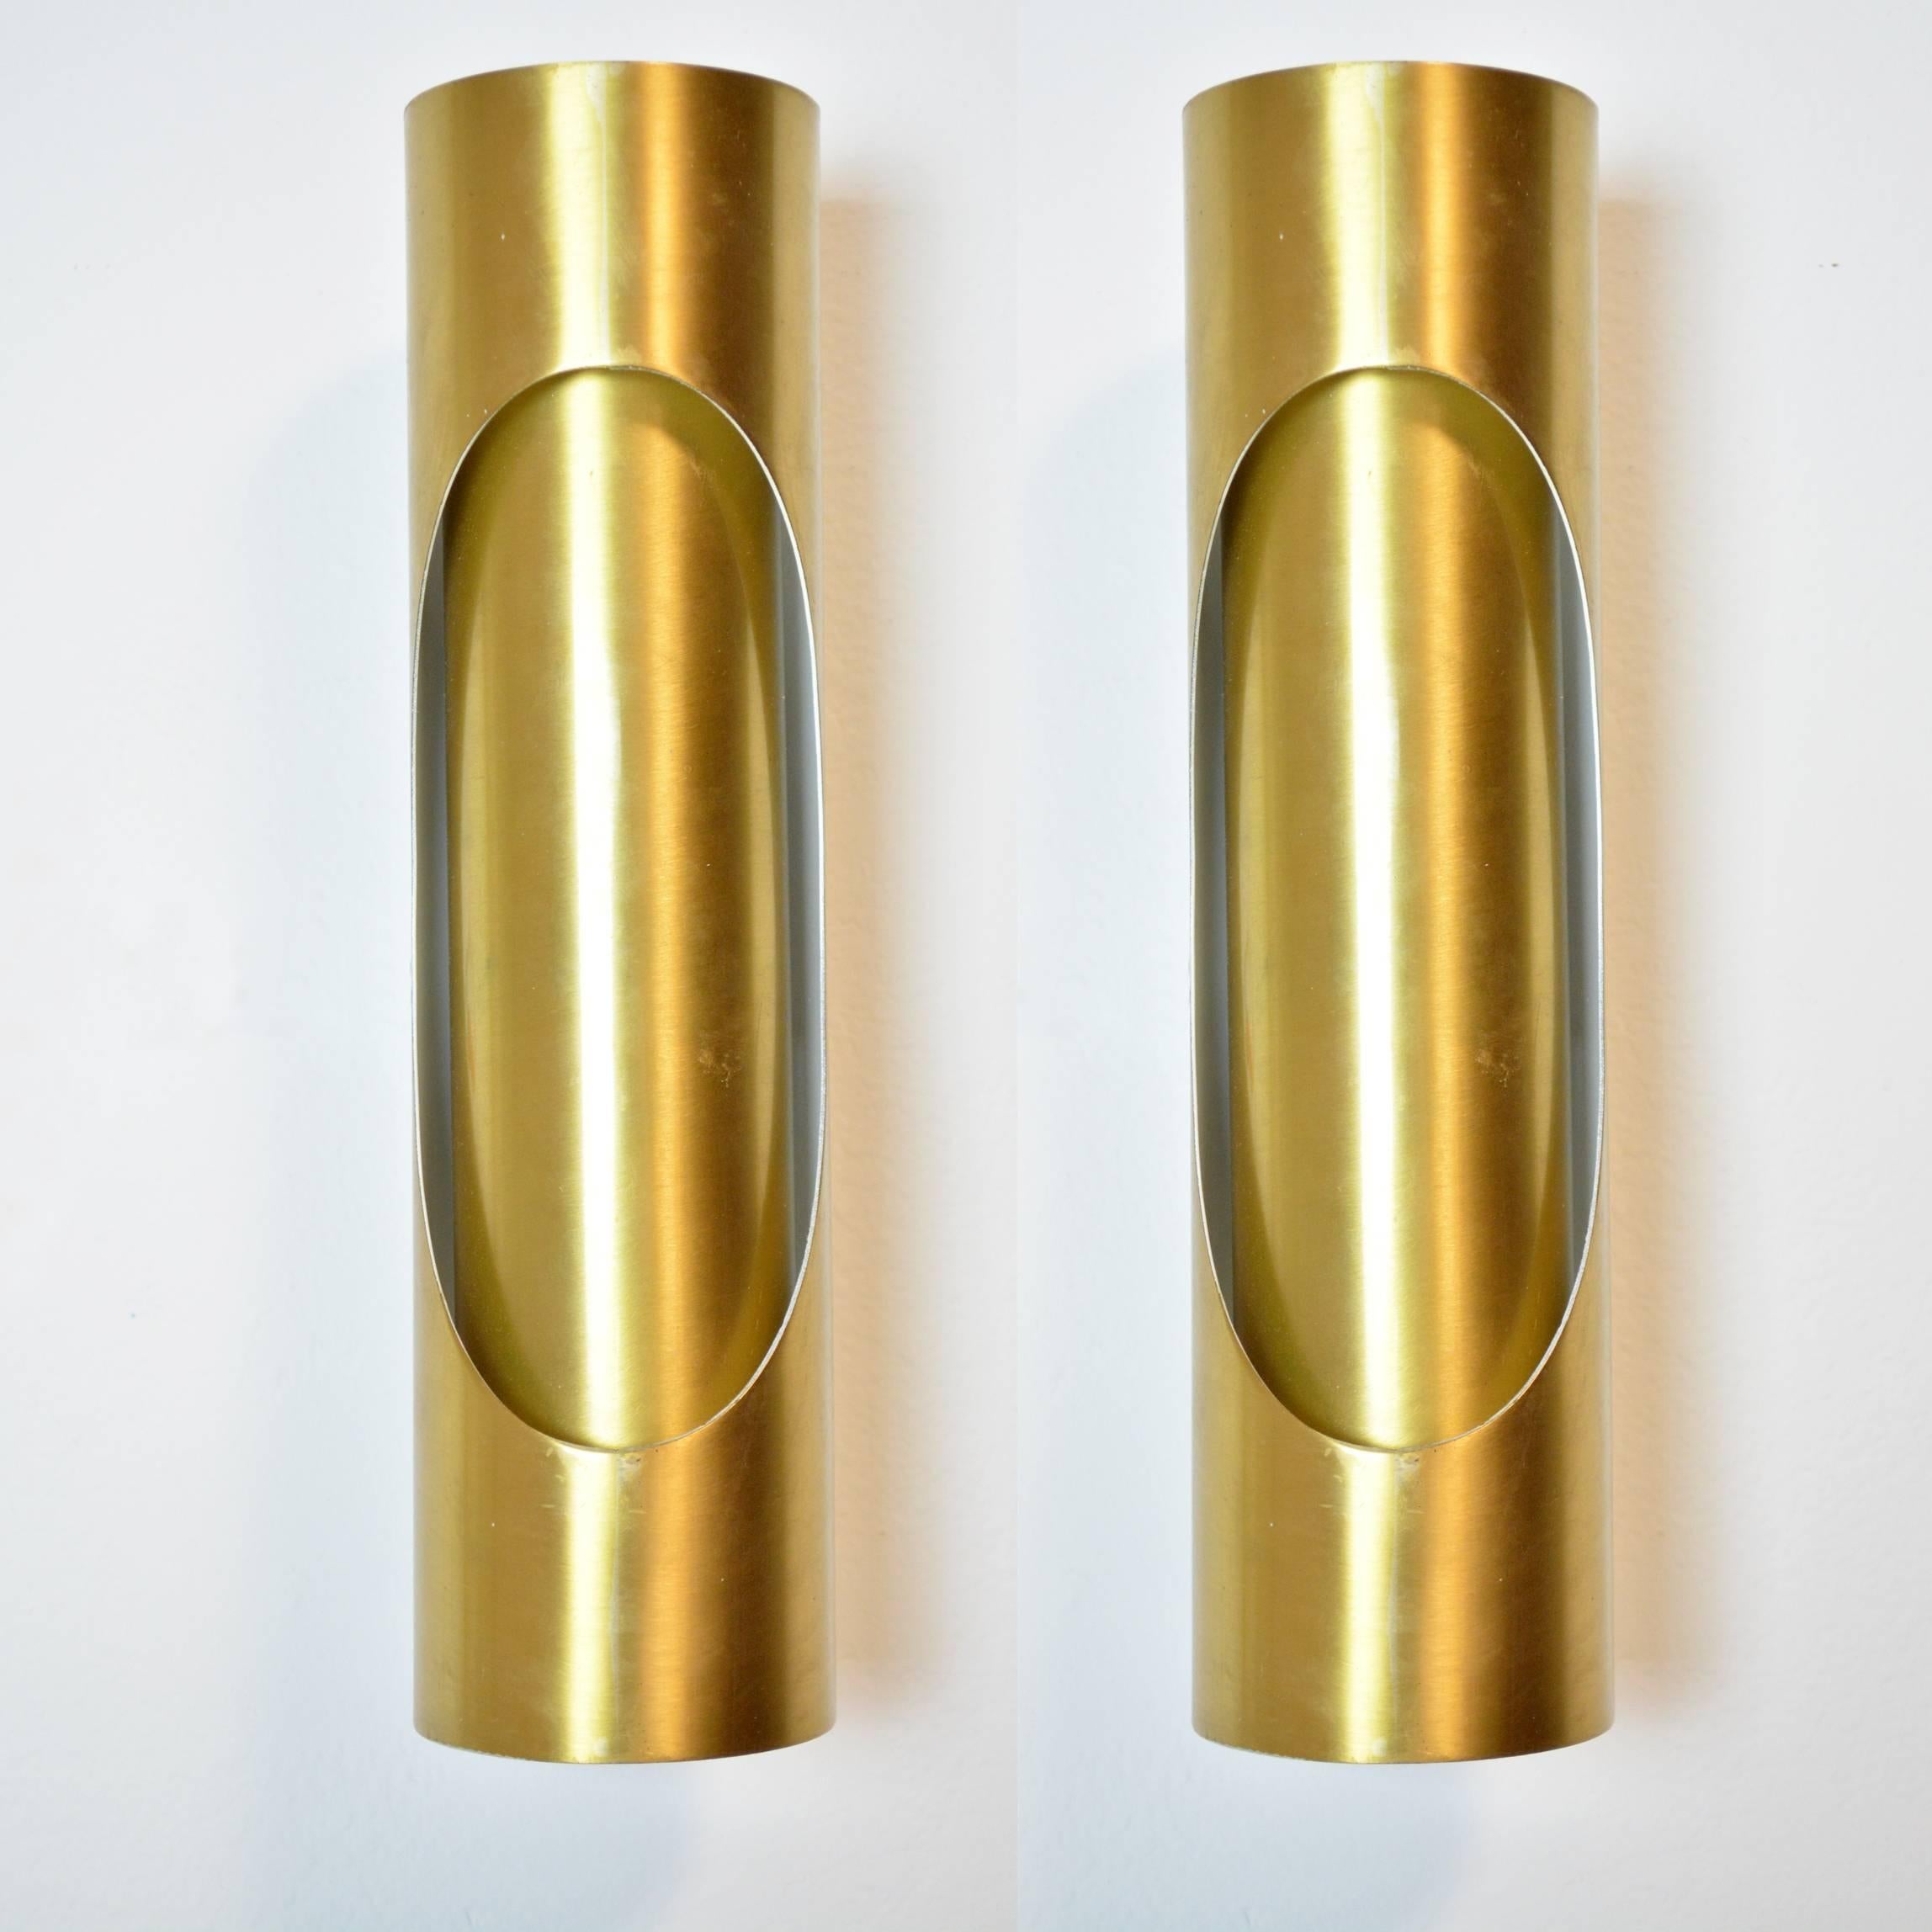 A pair of Spanish gold-tone metal tubular sconces, with two Edison base sockets. Newly wired for US use, with new painted backplates. Two pairs of sconces available. Similar in style to fixtures from the era by RAAK and Romeo Rega.

Two sets of